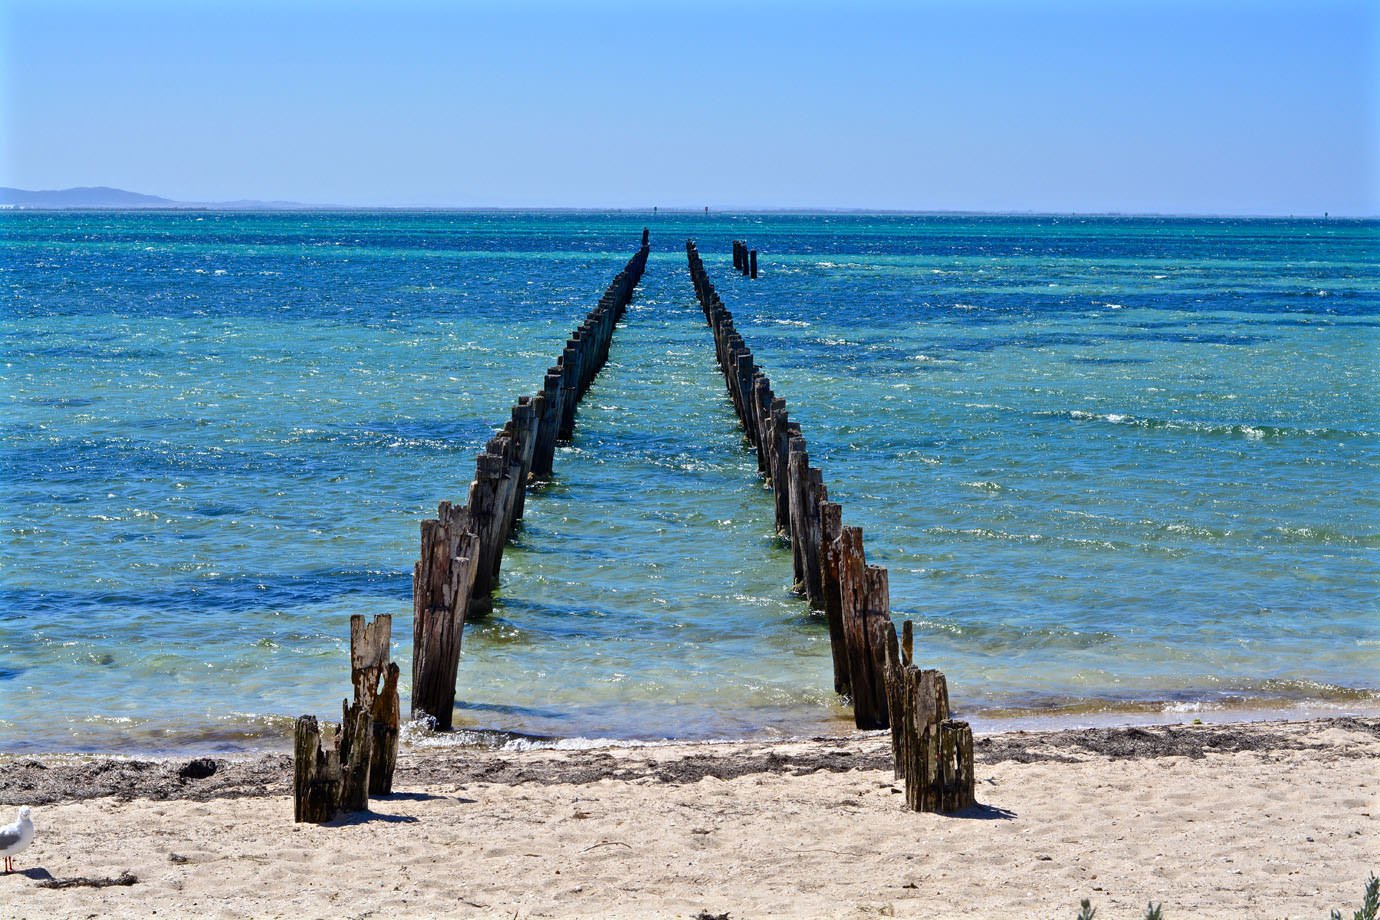 Remains of a jetty